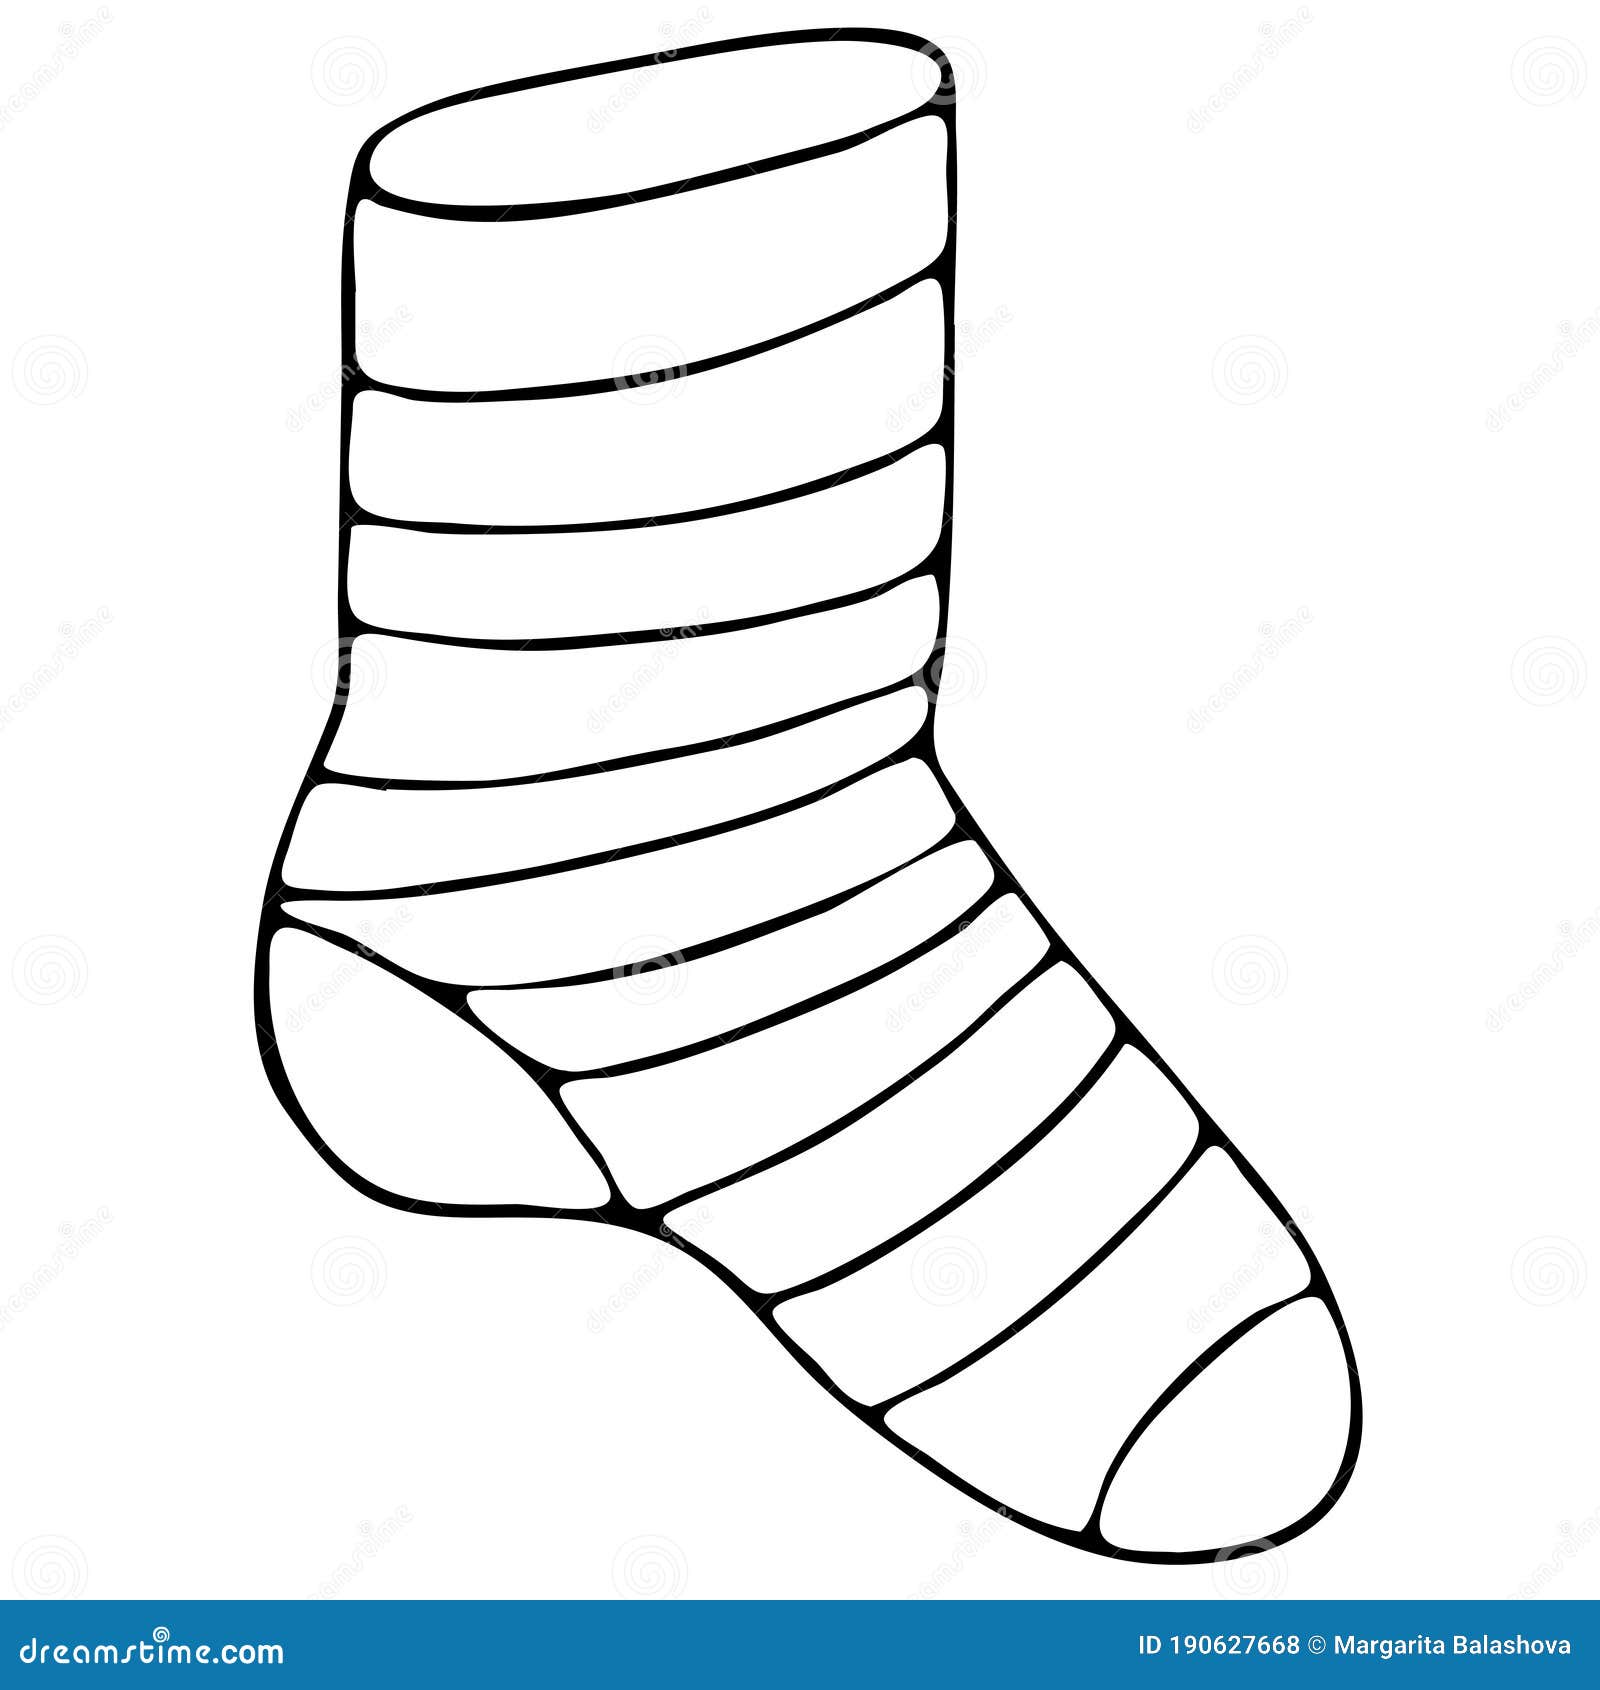 Vector Illustration With A Warm Cute Socks. Stylized Drawing For